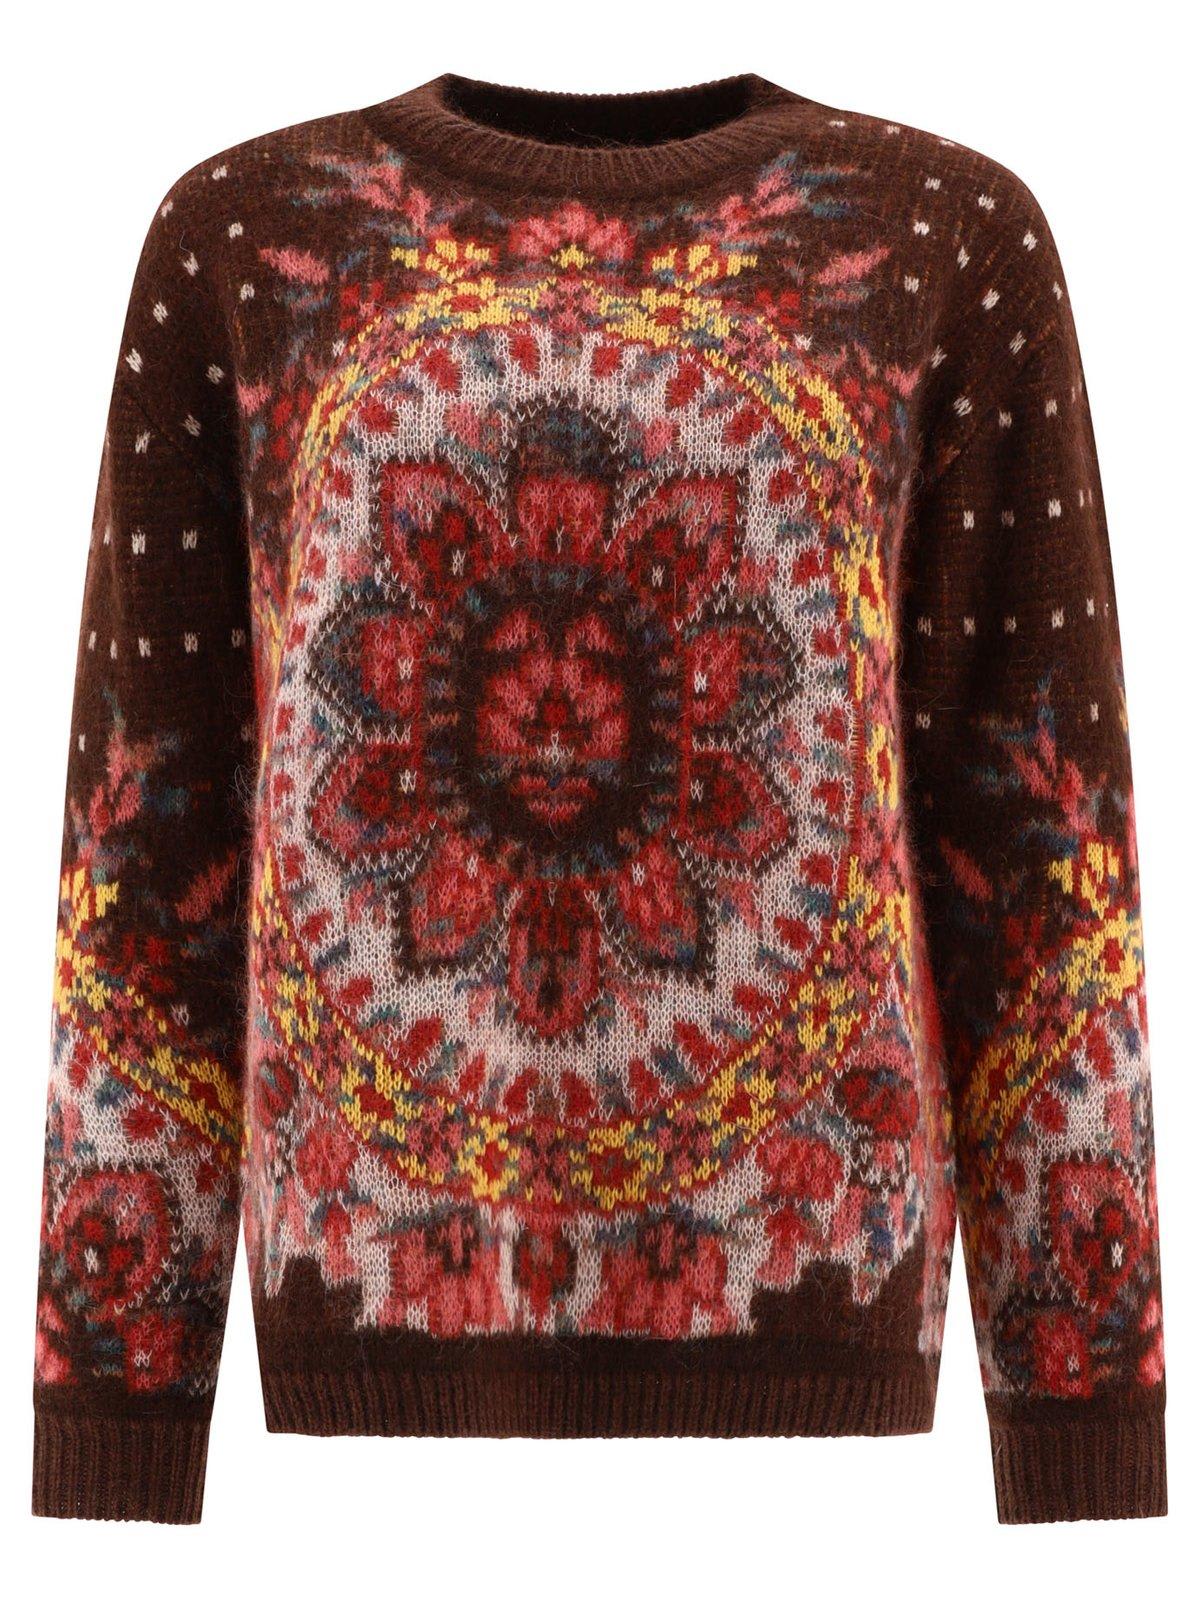 ETRO PATTERN PRINTED CREWNECK KNITTED JUMPER